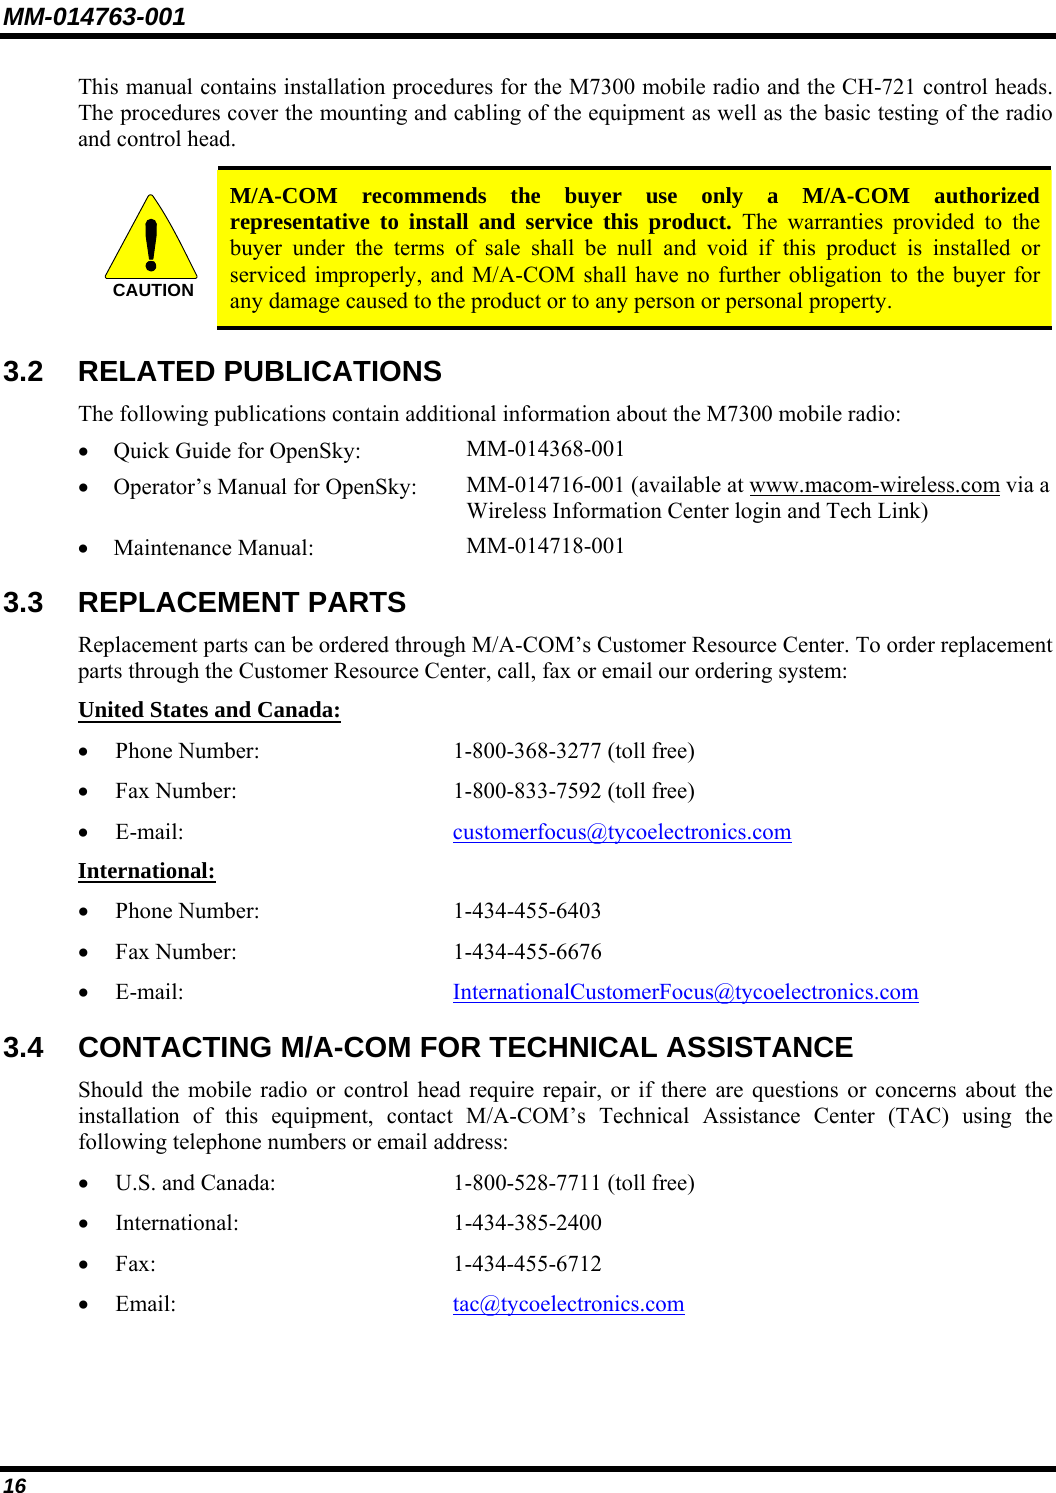 MM-014763-001 16 This manual contains installation procedures for the M7300 mobile radio and the CH-721 control heads. The procedures cover the mounting and cabling of the equipment as well as the basic testing of the radio and control head.  CAUTION  M/A-COM recommends the buyer use only a M/A-COM authorized representative to install and service this product. The warranties provided to the buyer under the terms of sale shall be null and void if this product is installed or serviced improperly, and M/A-COM shall have no further obligation to the buyer for any damage caused to the product or to any person or personal property. 3.2 RELATED PUBLICATIONS The following publications contain additional information about the M7300 mobile radio: • Quick Guide for OpenSky:  MM-014368-001 • Operator’s Manual for OpenSky:  MM-014716-001 (available at www.macom-wireless.com via a Wireless Information Center login and Tech Link) • Maintenance Manual:  MM-014718-001 3.3 REPLACEMENT PARTS Replacement parts can be ordered through M/A-COM’s Customer Resource Center. To order replacement parts through the Customer Resource Center, call, fax or email our ordering system: United States and Canada: • Phone Number:   1-800-368-3277 (toll free) • Fax Number:  1-800-833-7592 (toll free) • E-mail:  customerfocus@tycoelectronics.com International: • Phone Number:  1-434-455-6403 • Fax Number:  1-434-455-6676 • E-mail:  InternationalCustomerFocus@tycoelectronics.com 3.4 CONTACTING M/A-COM FOR TECHNICAL ASSISTANCE Should the mobile radio or control head require repair, or if there are questions or concerns about the installation of this equipment, contact M/A-COM’s Technical Assistance Center (TAC) using the following telephone numbers or email address: • U.S. and Canada:  1-800-528-7711 (toll free) • International: 1-434-385-2400 • Fax: 1-434-455-6712 • Email:  tac@tycoelectronics.com 